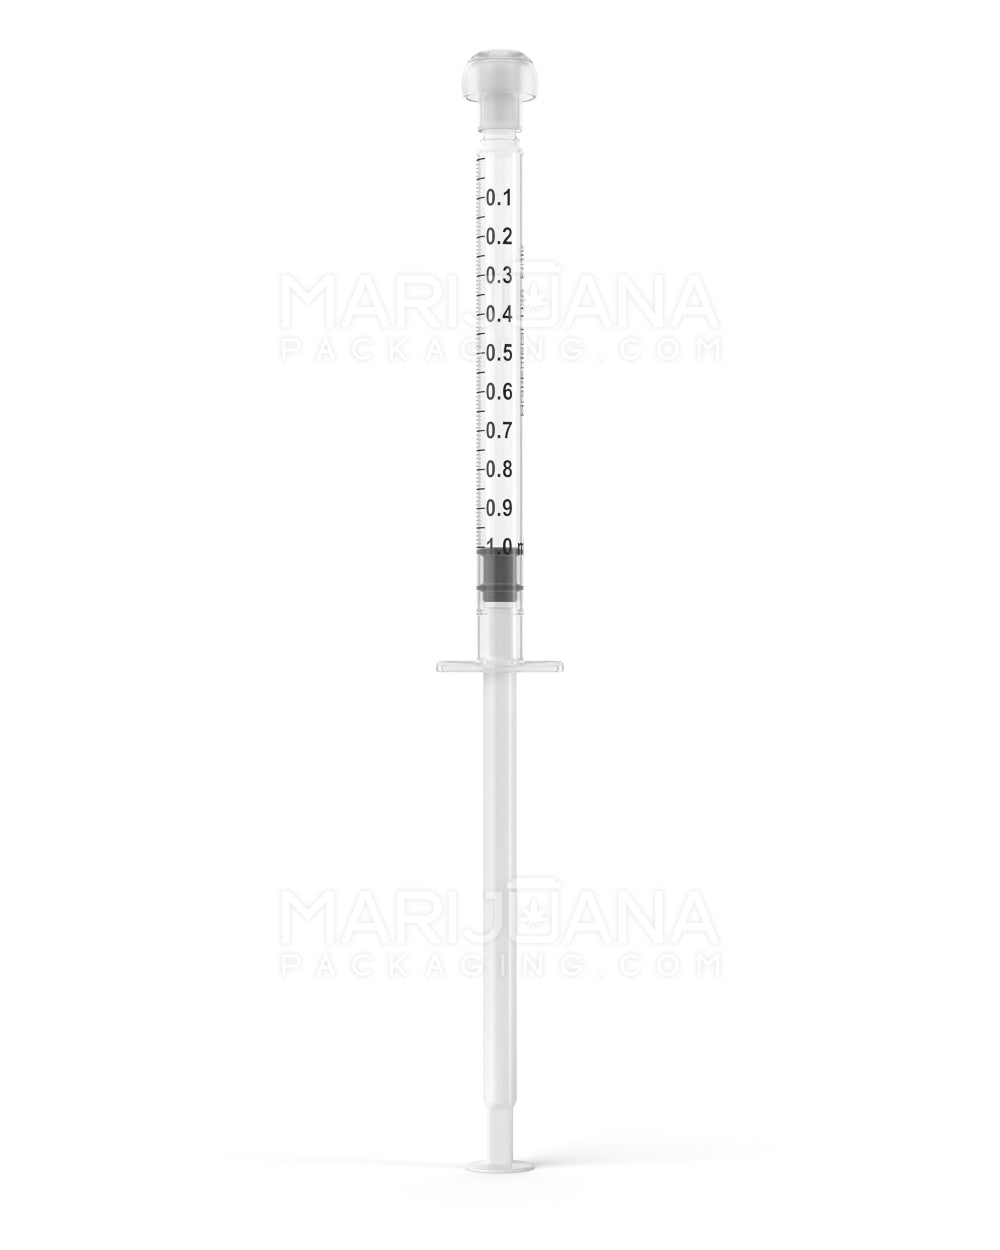 Plastic Oral Concentrate Syringes | 1mL - 0.1mL Increments - 100 Count - 1